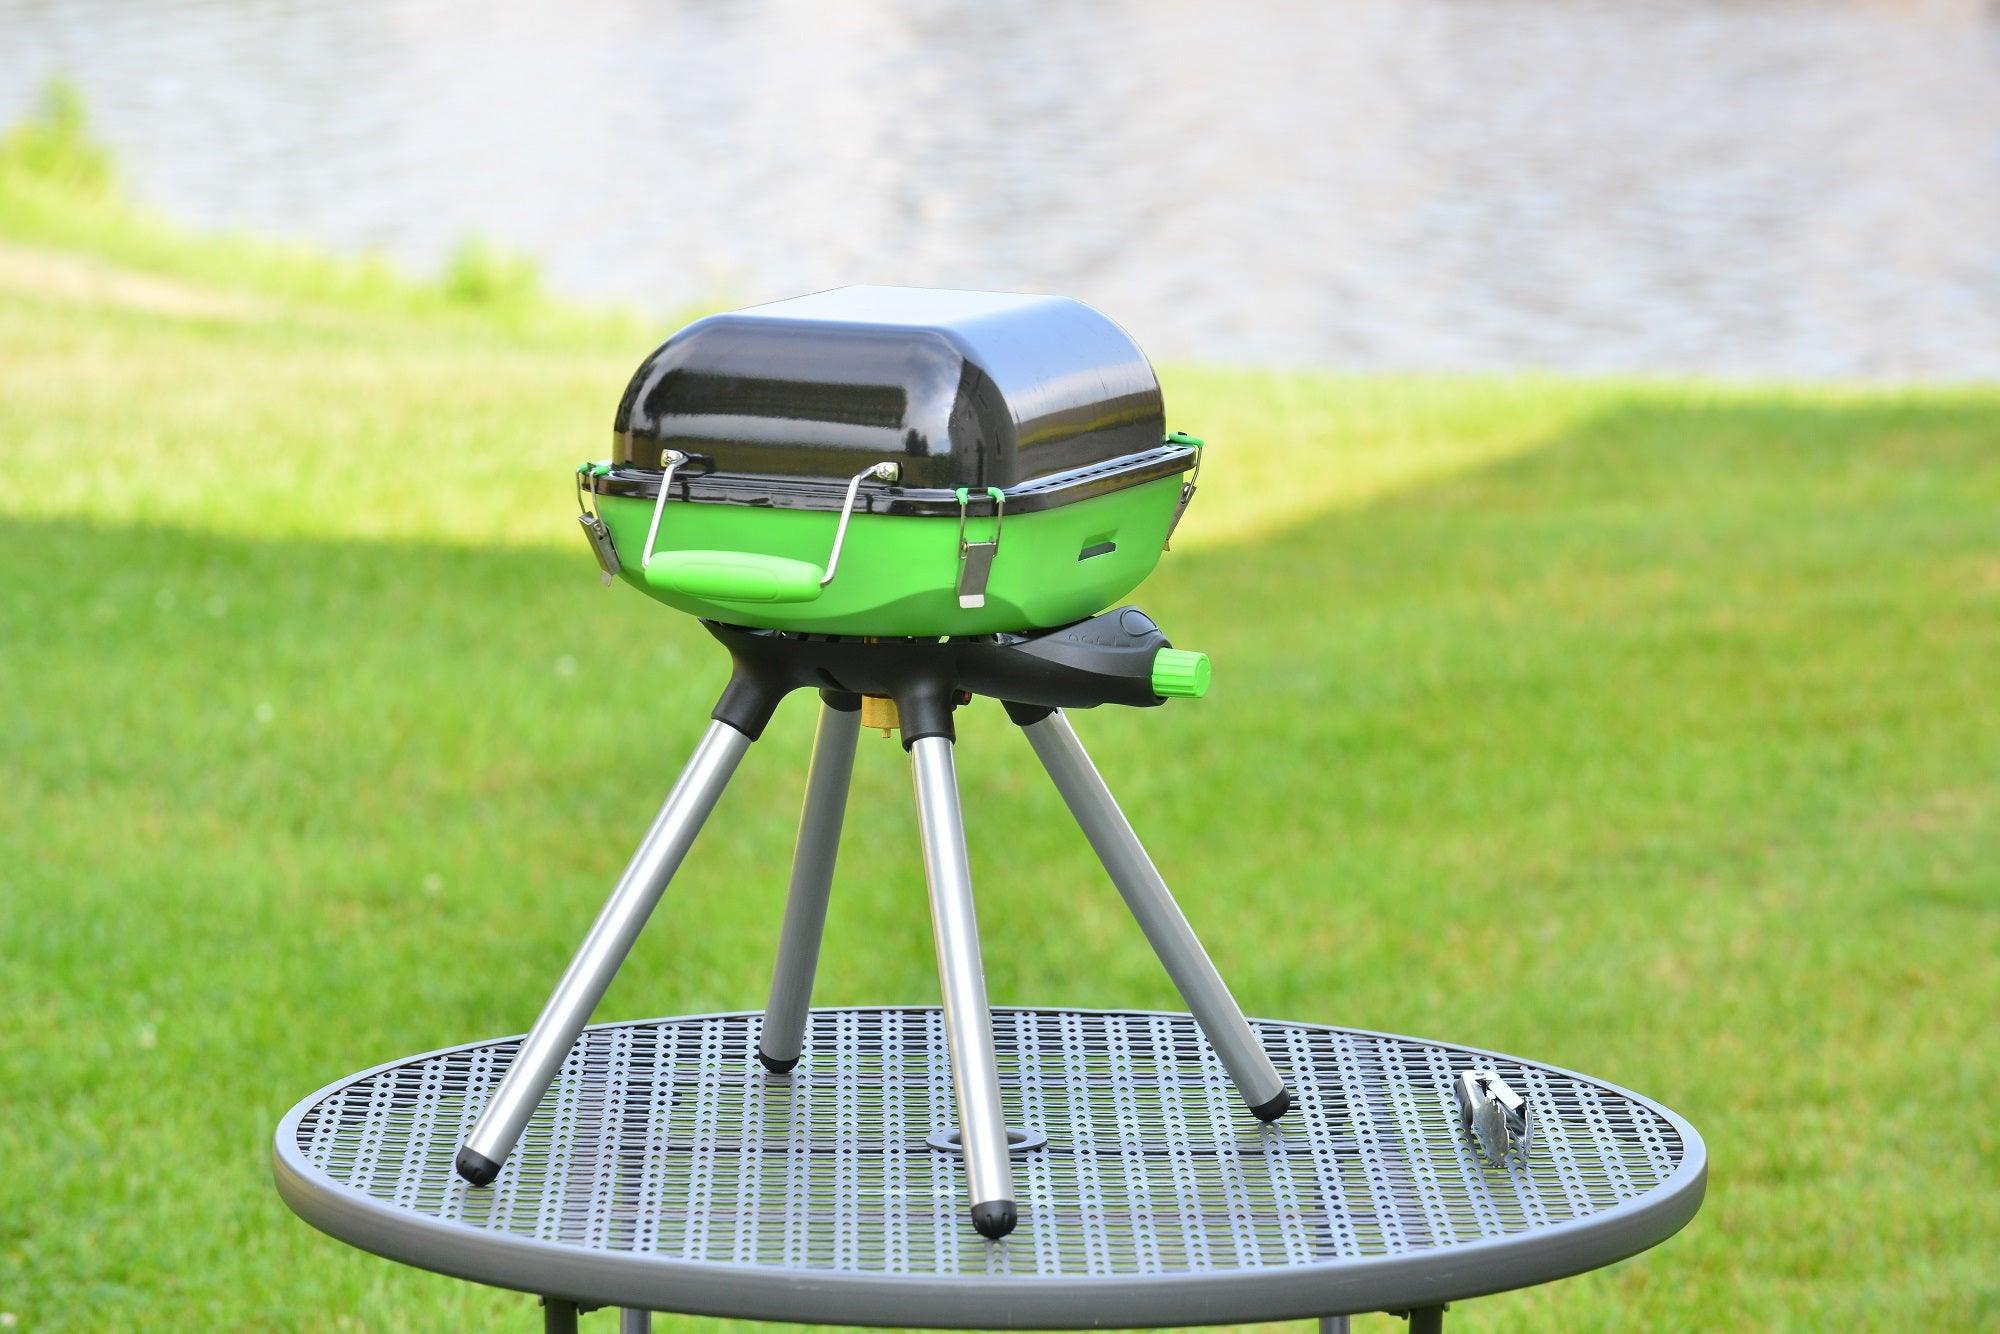 Grilliput - This Lightweight Camping Grill Fits in a Tube - ADV Pulse